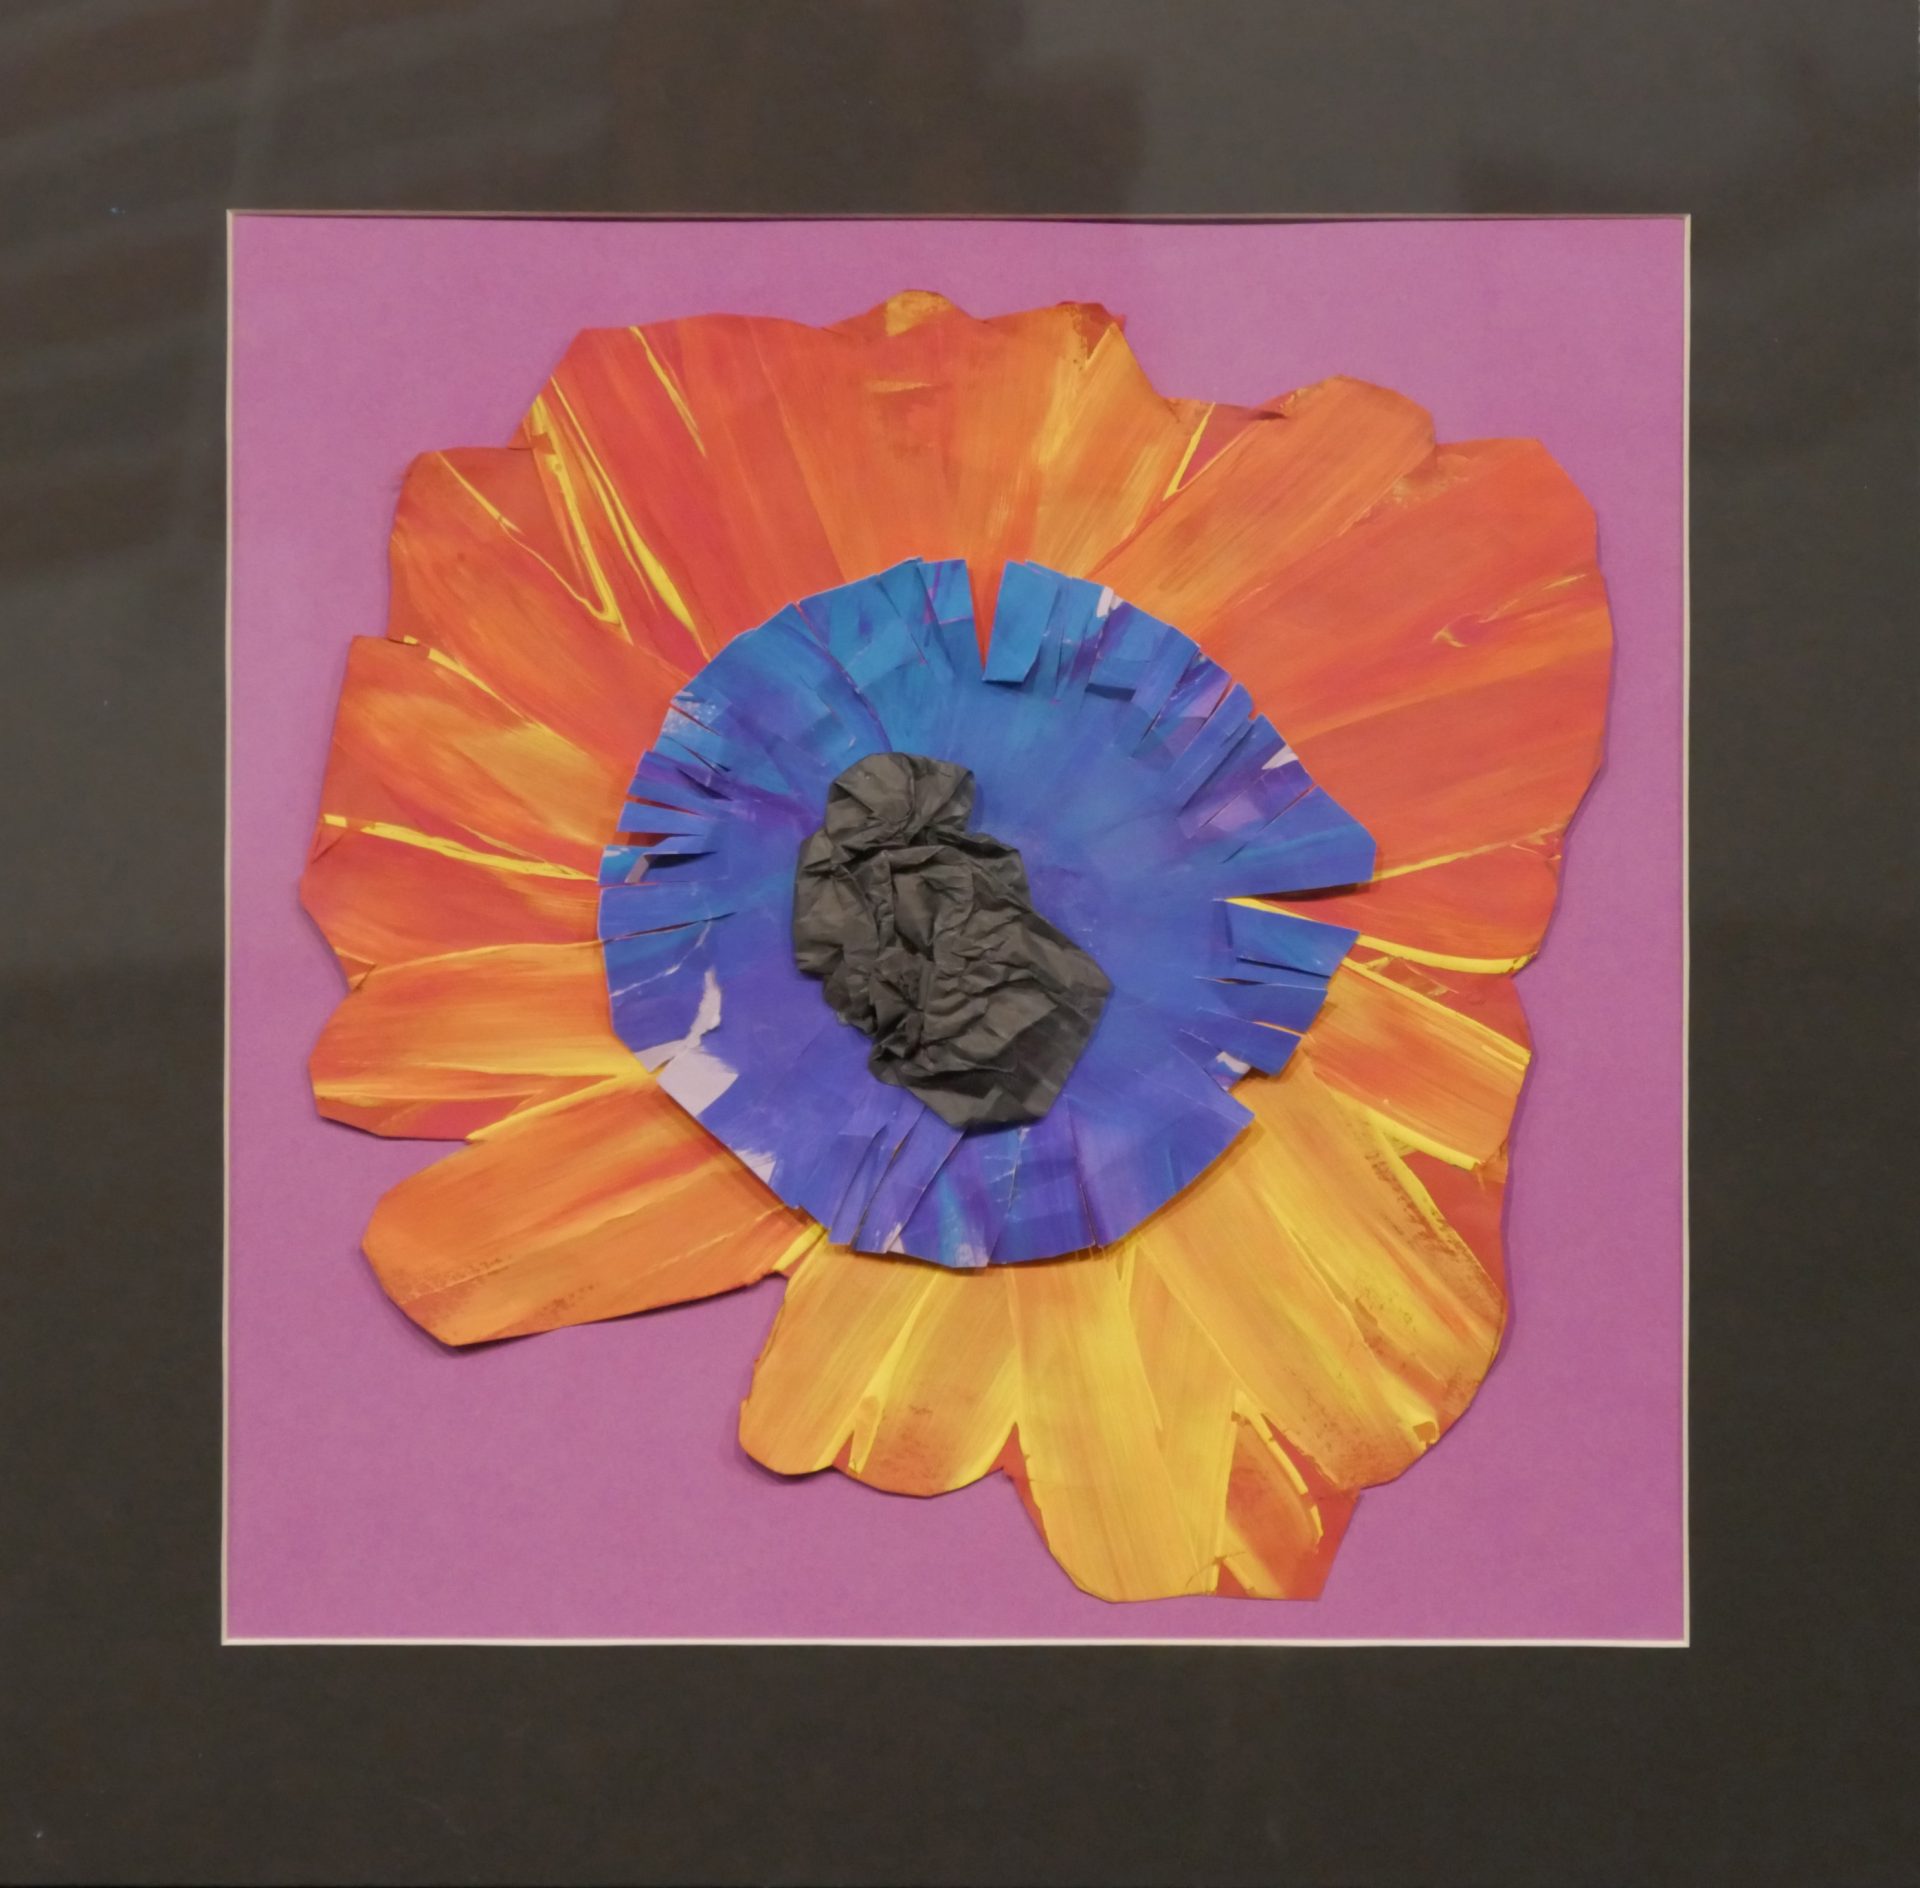 'Poppy' by Cayden Howell (acrylic on paper)